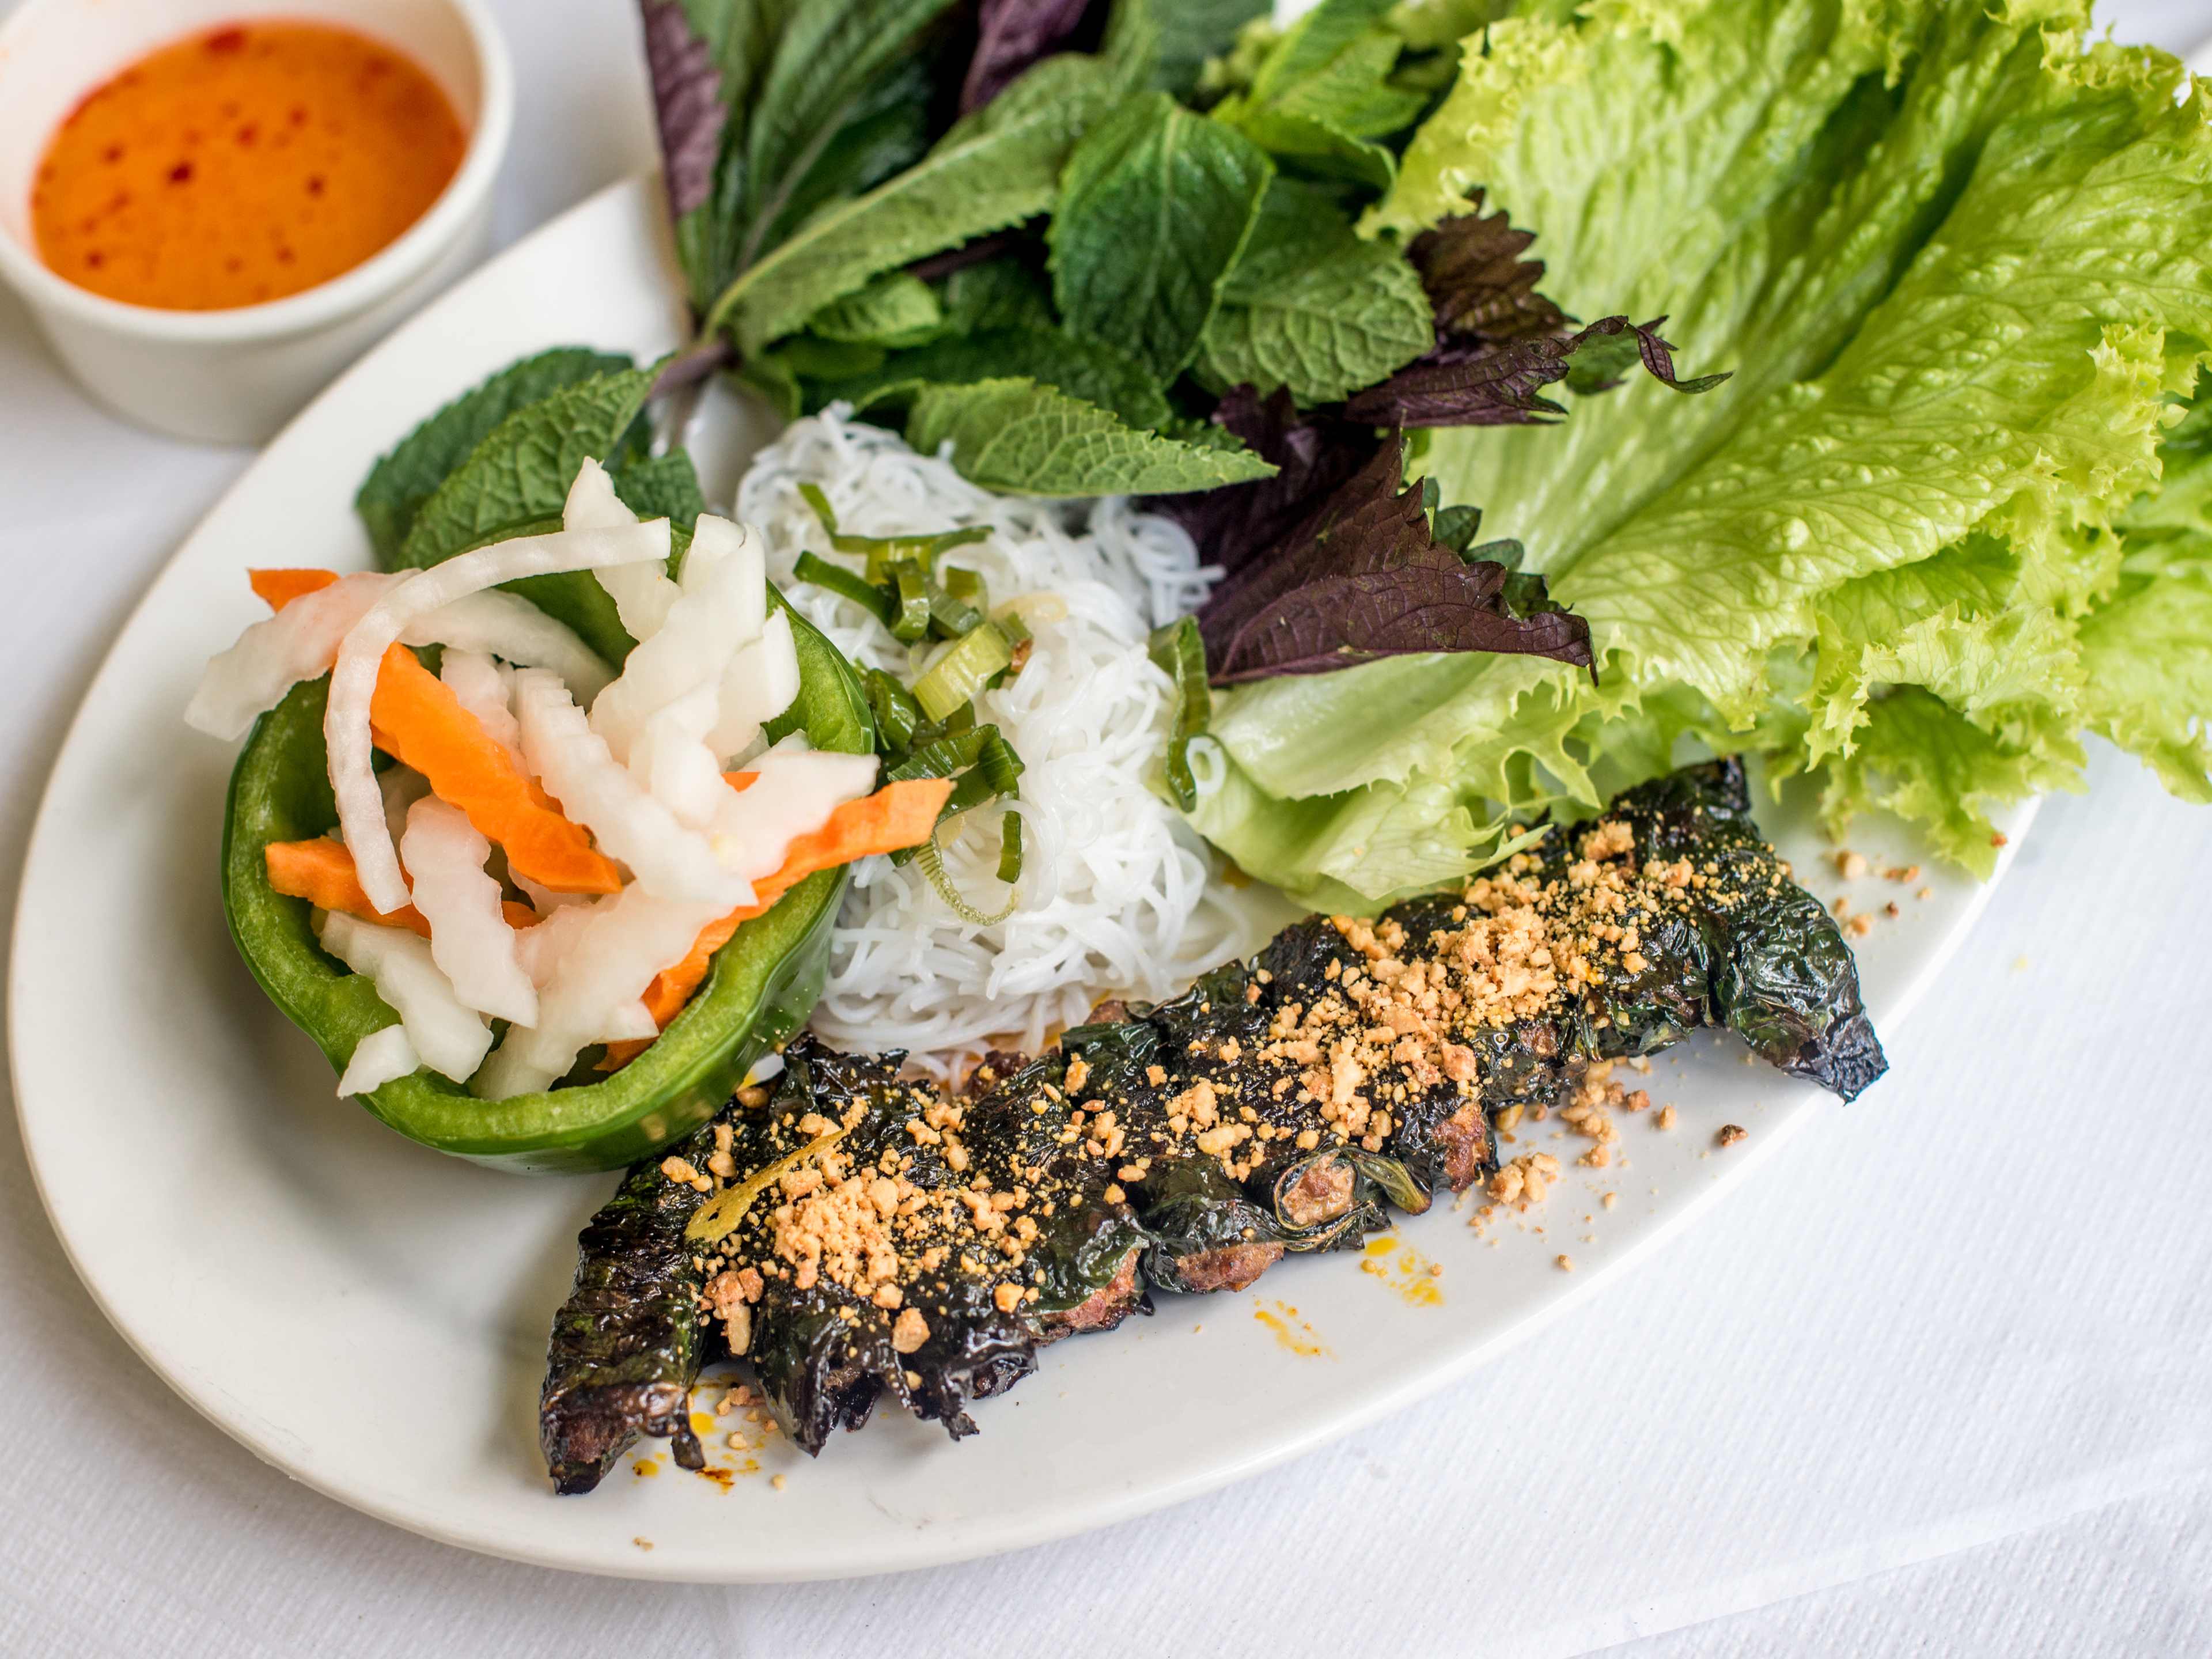 The grilled beef wrapped in betel leaves from Sông Quê.